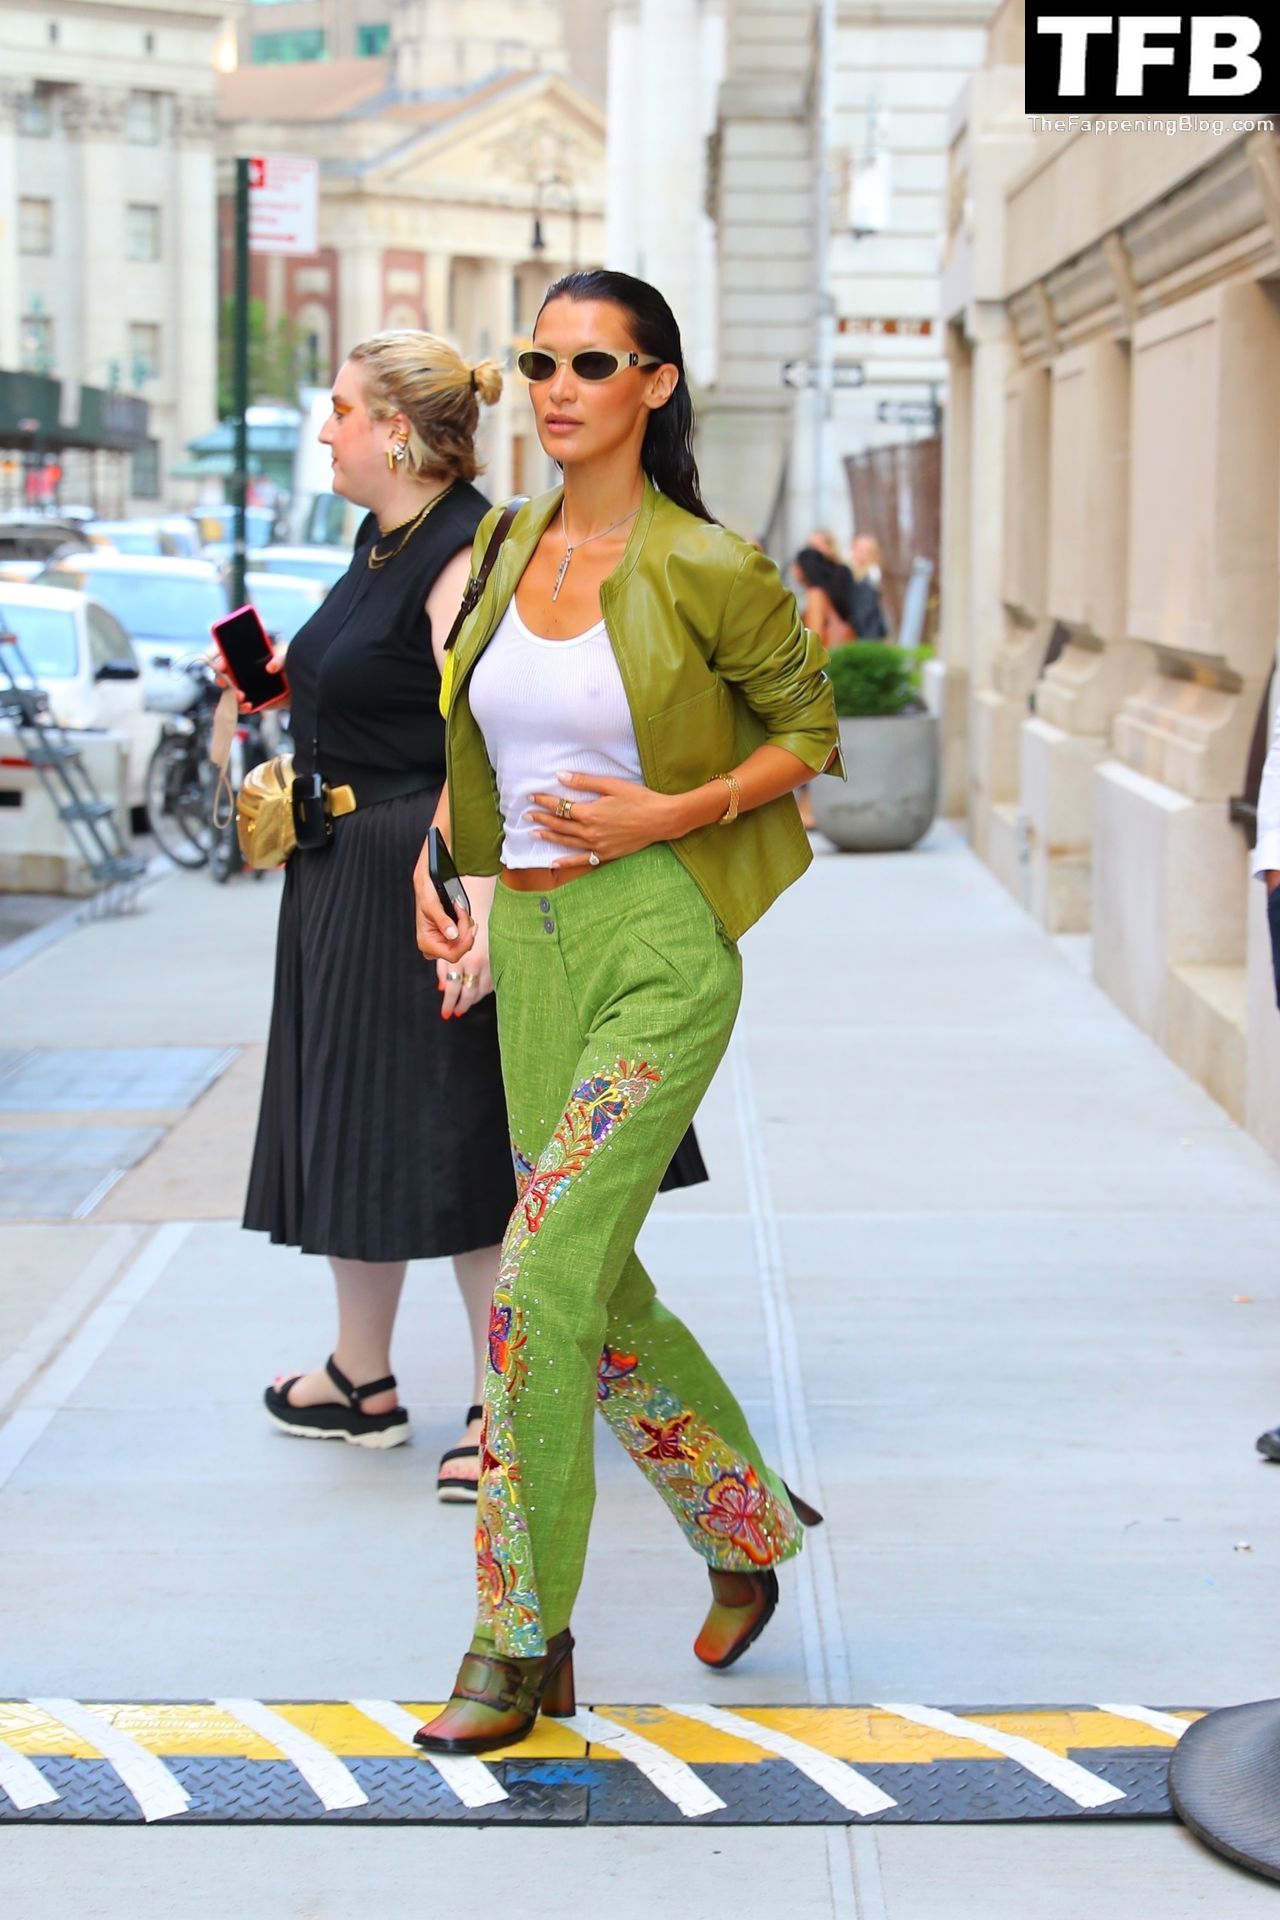 Bella Hadid See Through Braless The Fappening Blog 21 - Braless Bella Hadid Wears the Cutest Lime Green Look While Out in NYC (54 Photos)